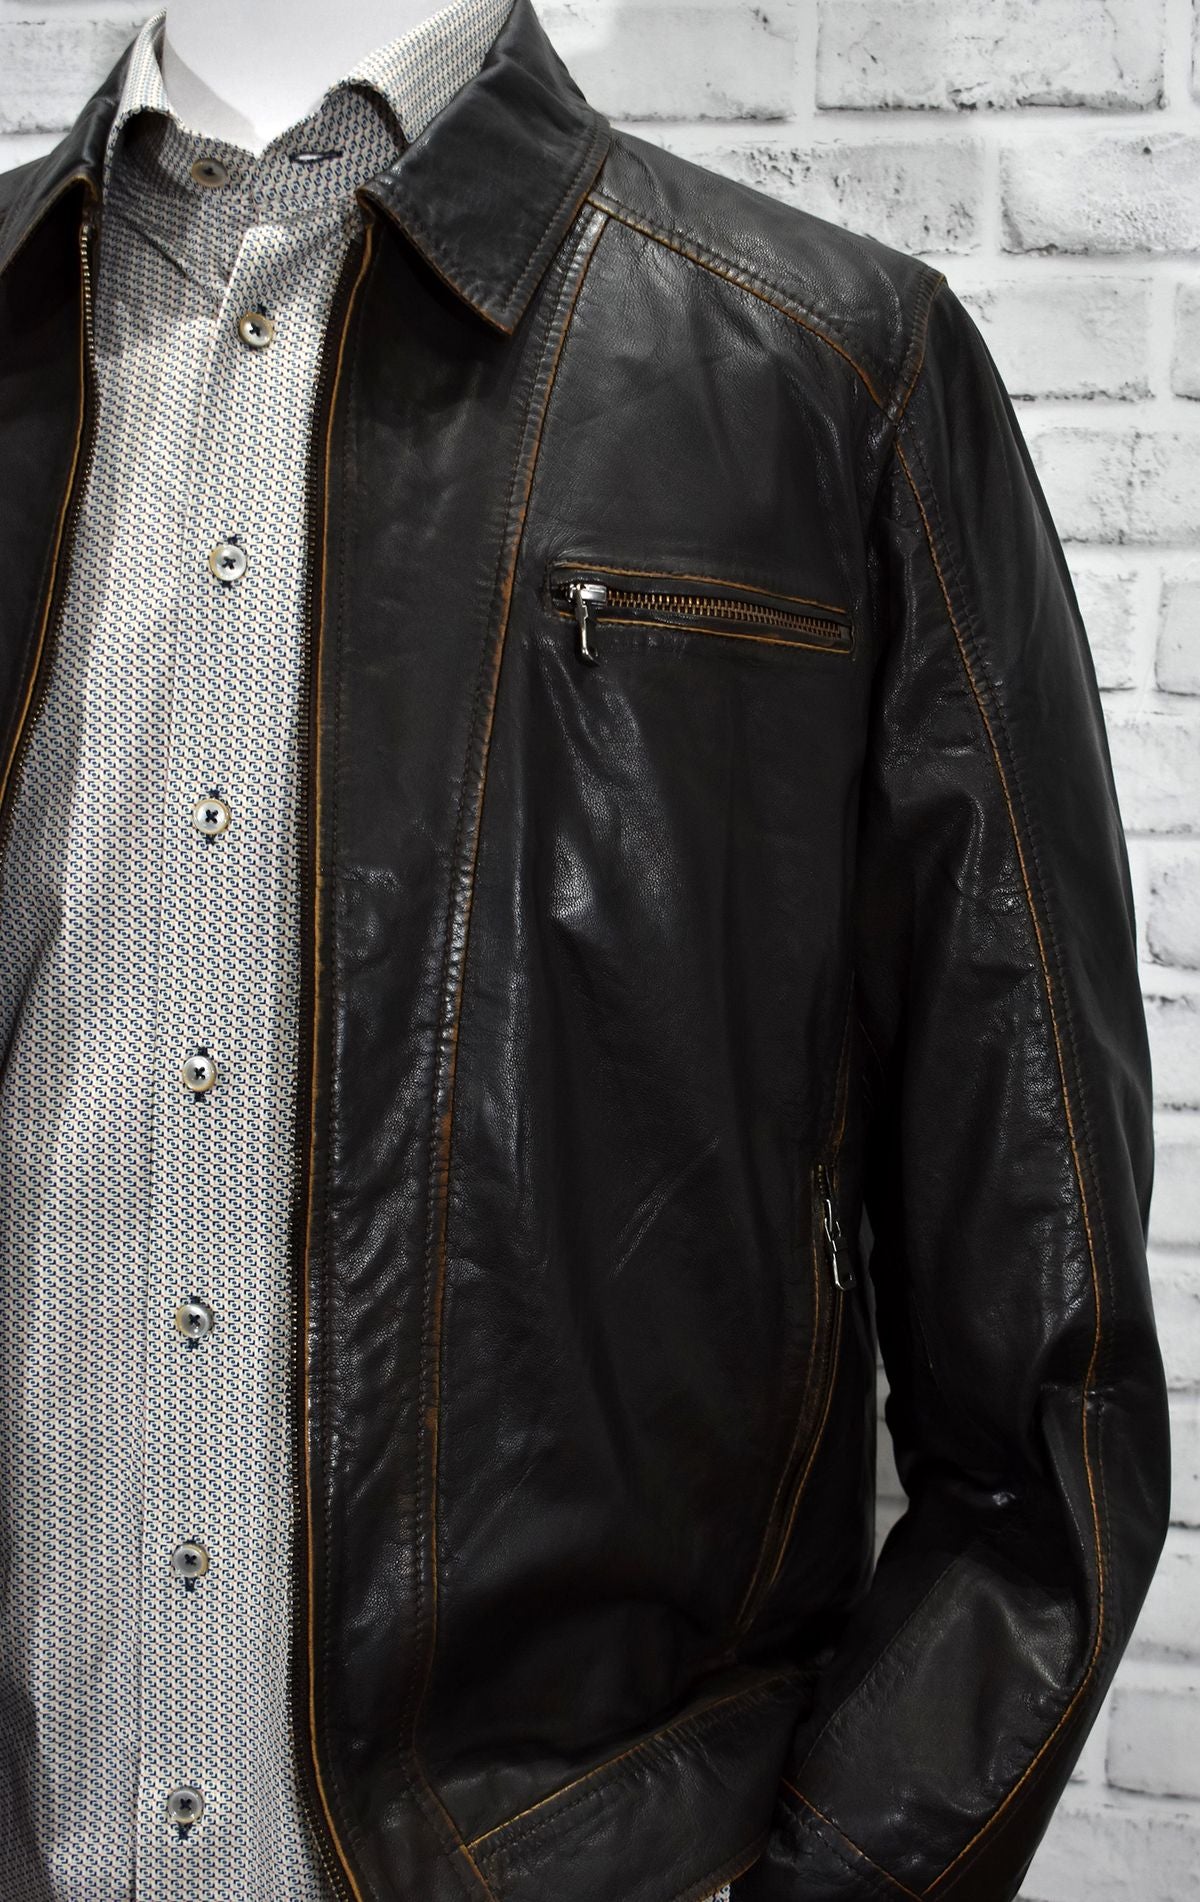 Saturday night out or riding is the best when you have an excellent, soft leather coat with camel raw edges and a soft polo style collar. The look is fashionable yet classic and portrays a celebrity image. Open bottom and open adjustable cuffs for added comfort and style. Classic fit. Biker Leather by Marcello Sport